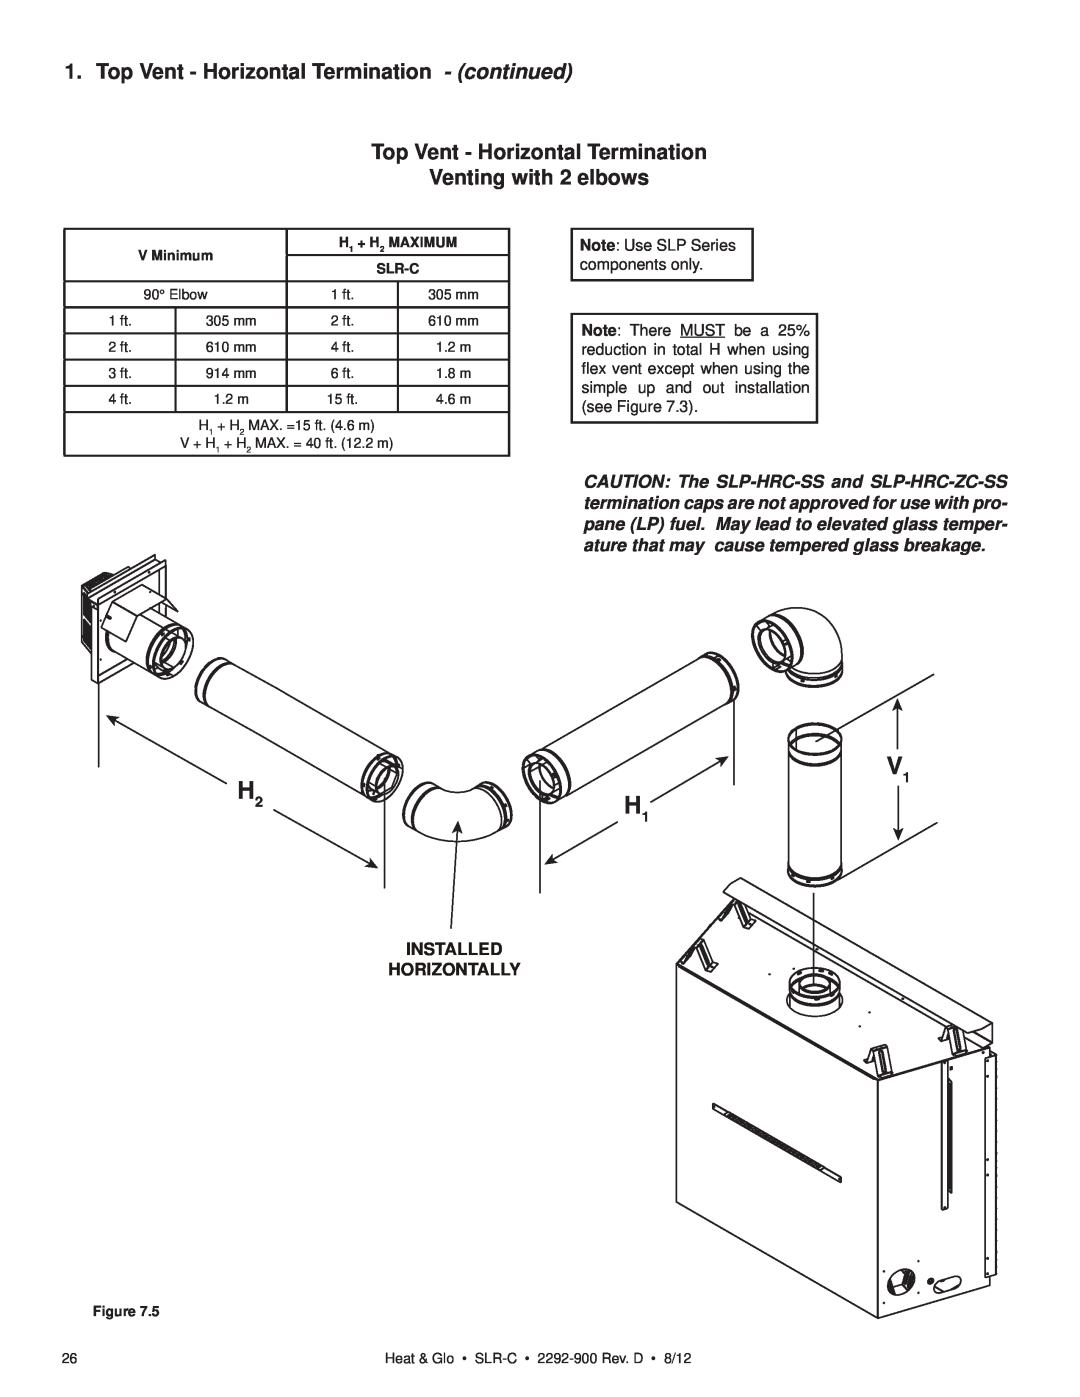 Heat & Glo LifeStyle SLR-C (COSMO) Top Vent - Horizontal Termination - continued, Venting with 2 elbows, V Minimum, Slr-C 